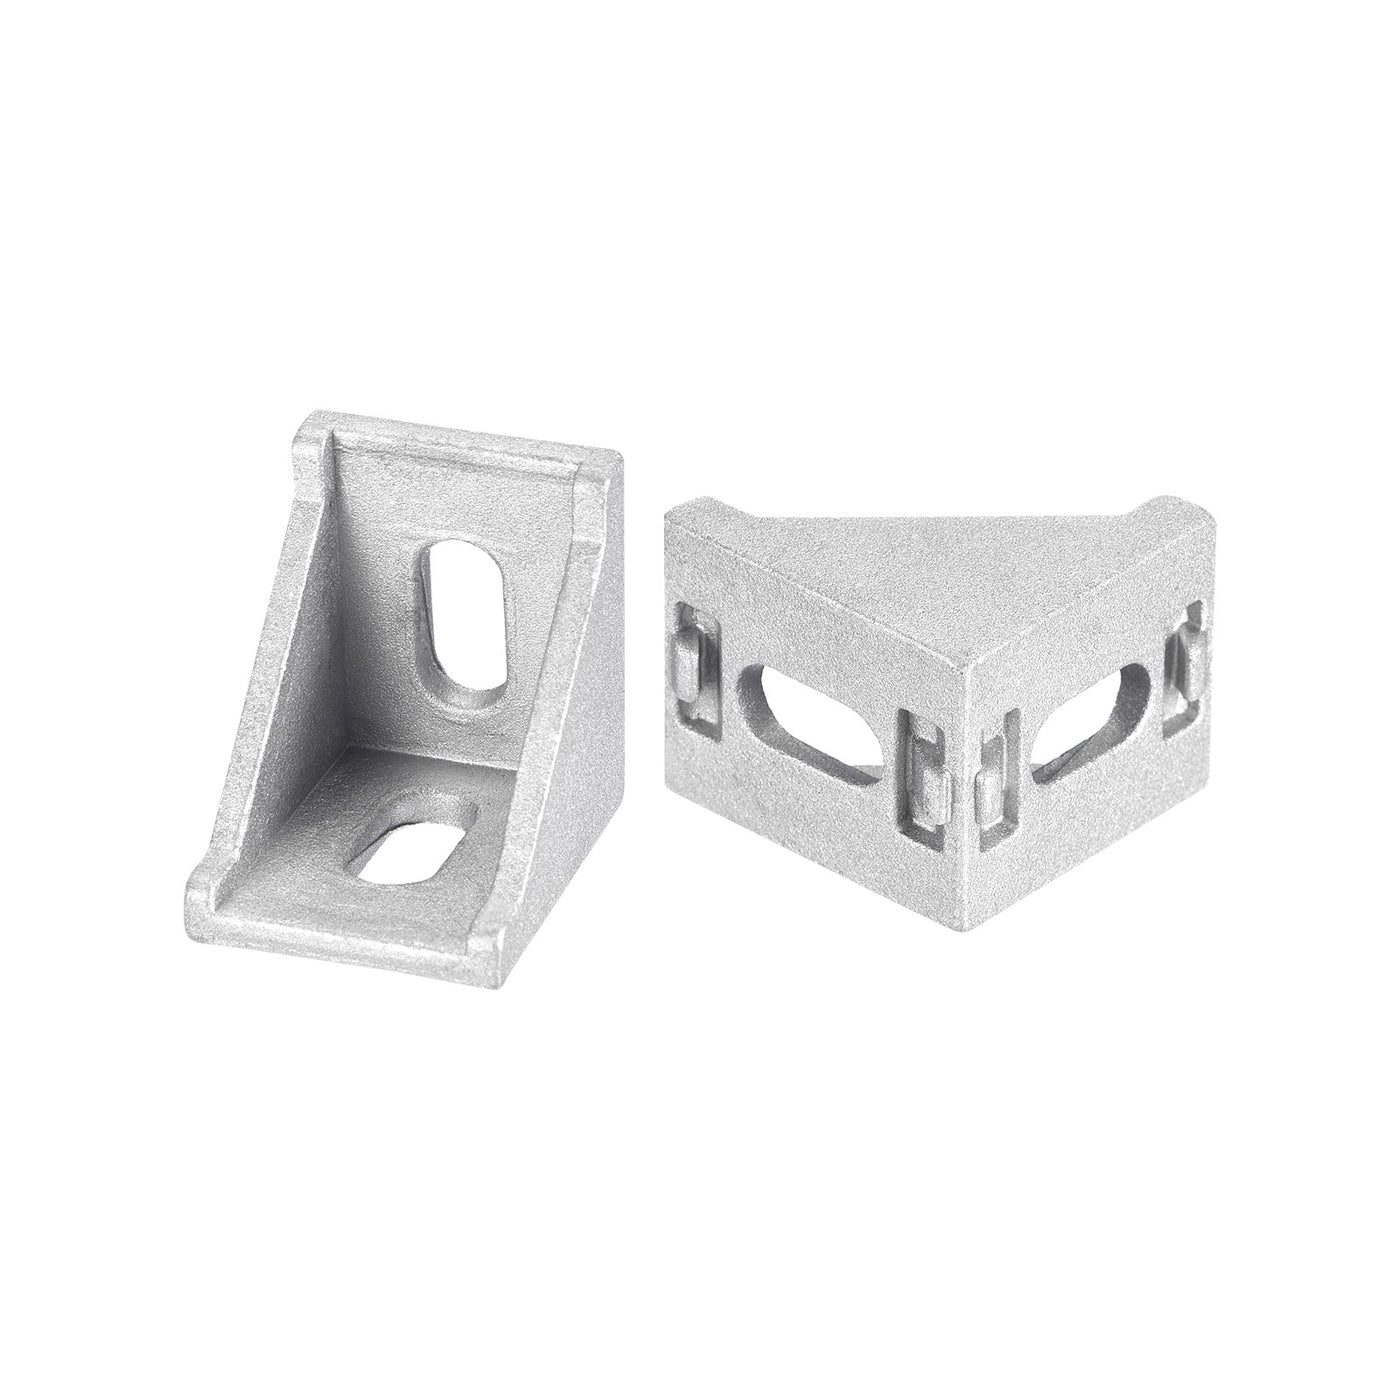 uxcell Uxcell 8Pcs Inside Corner Bracket Gusset, 35x35x29mm 3030 Angle Connectors for 3030/3060 Series Aluminum Extrusion Profile Silver